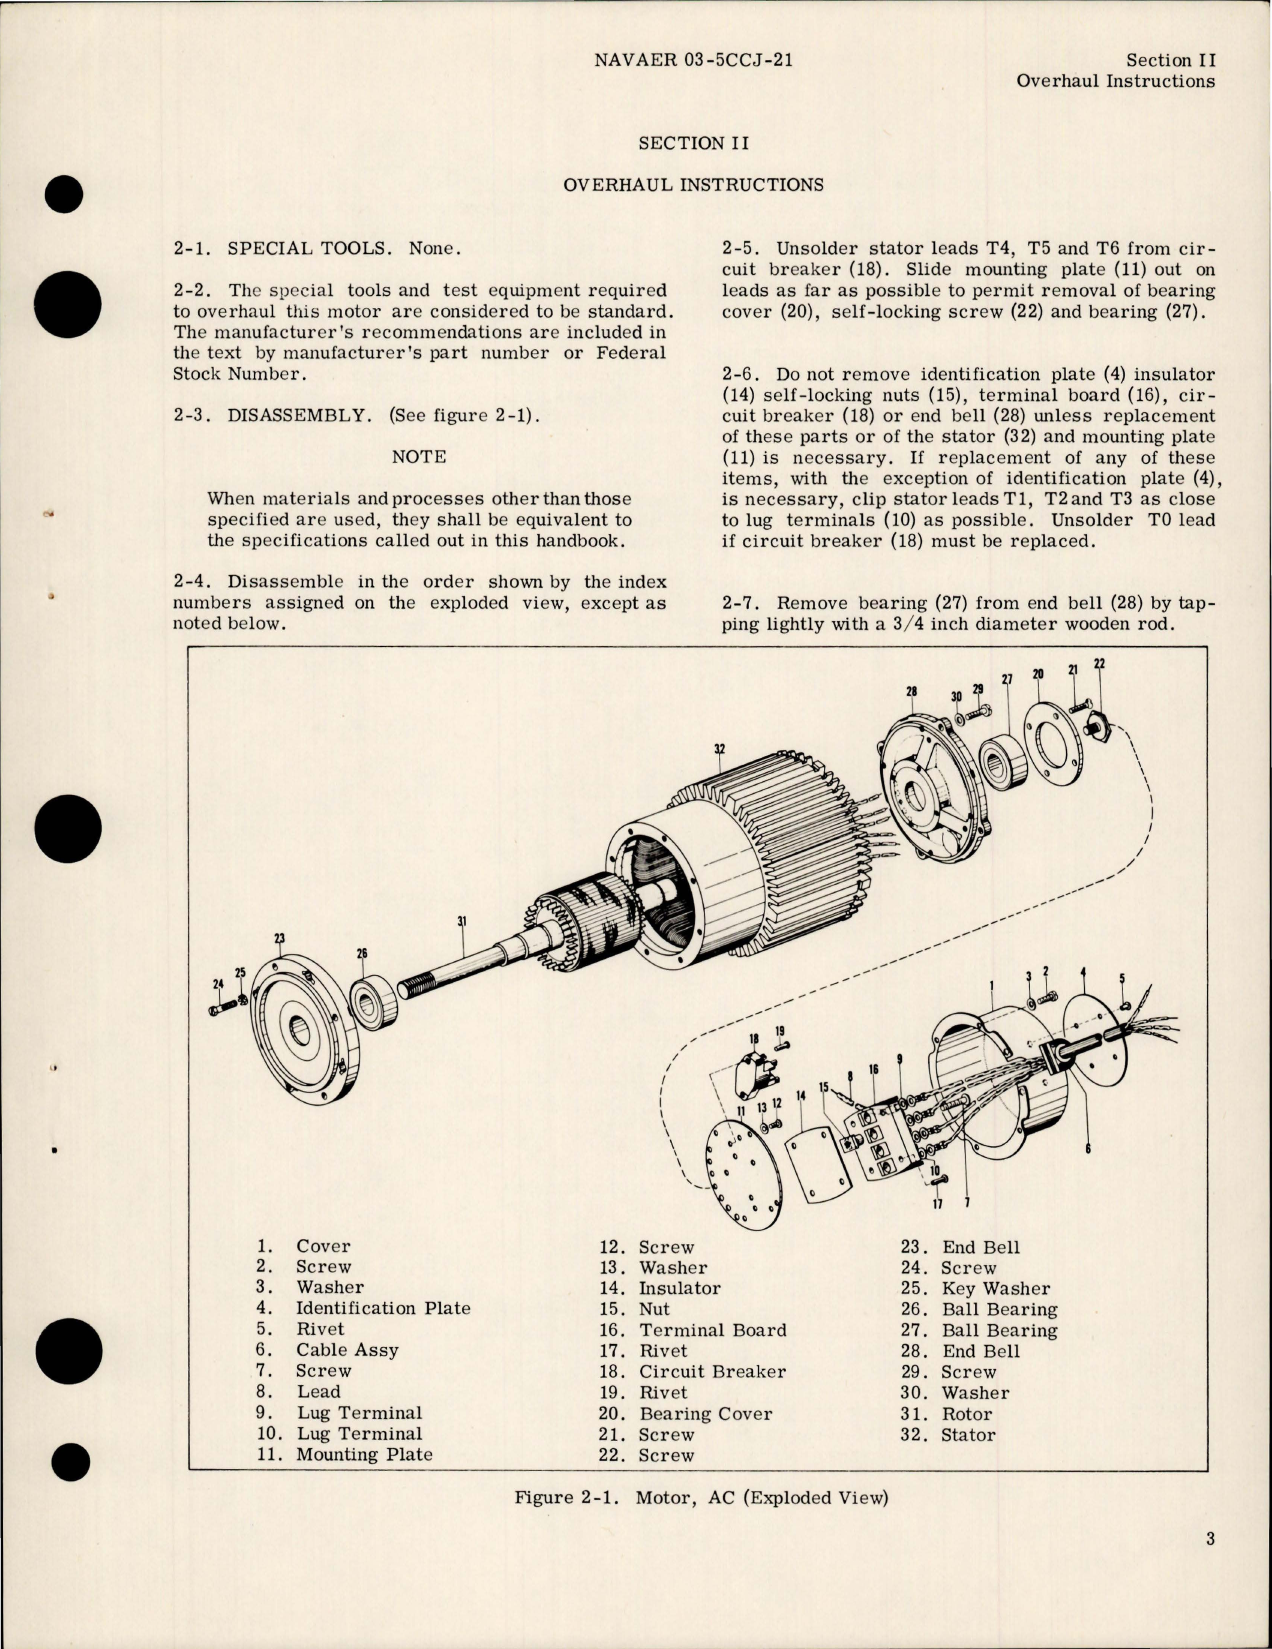 Sample page 7 from AirCorps Library document: Overhaul Instructions for AC Motor - Parts 906D085-1, 906D086-1, and 906D087-1